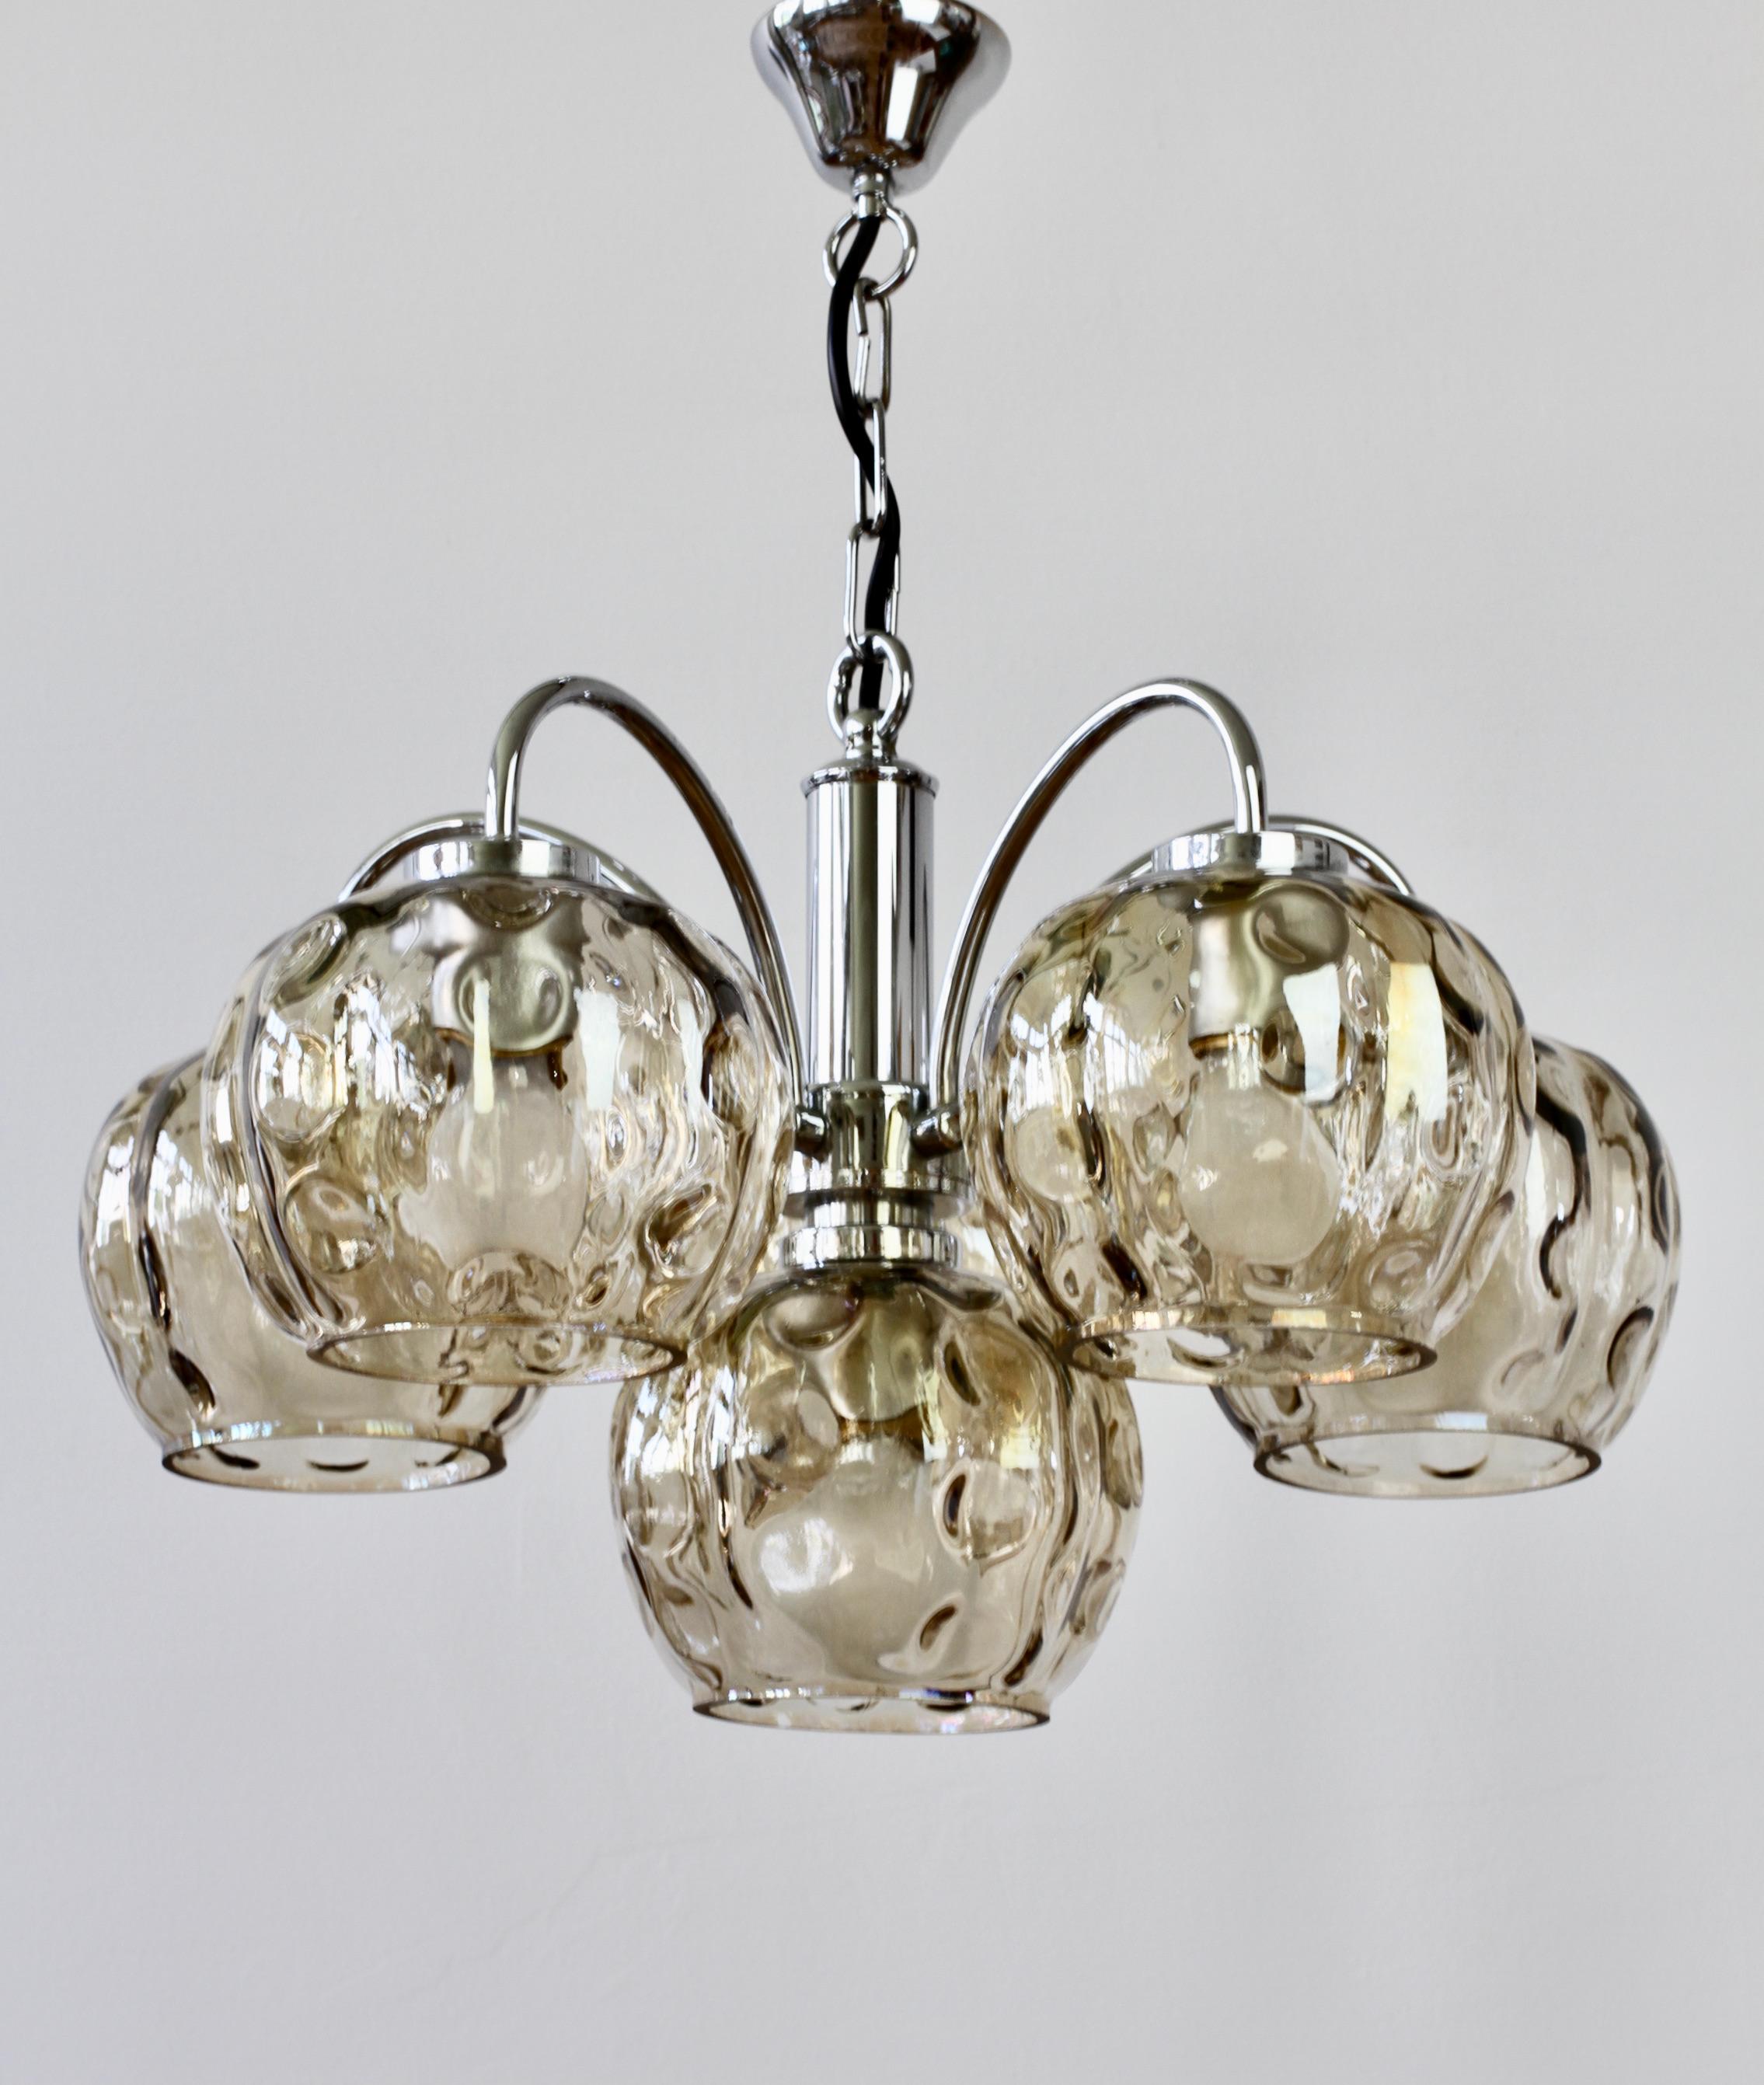 Molded 1970s Vintage Six Arm Chrome Chandelier with Smoked Toned 